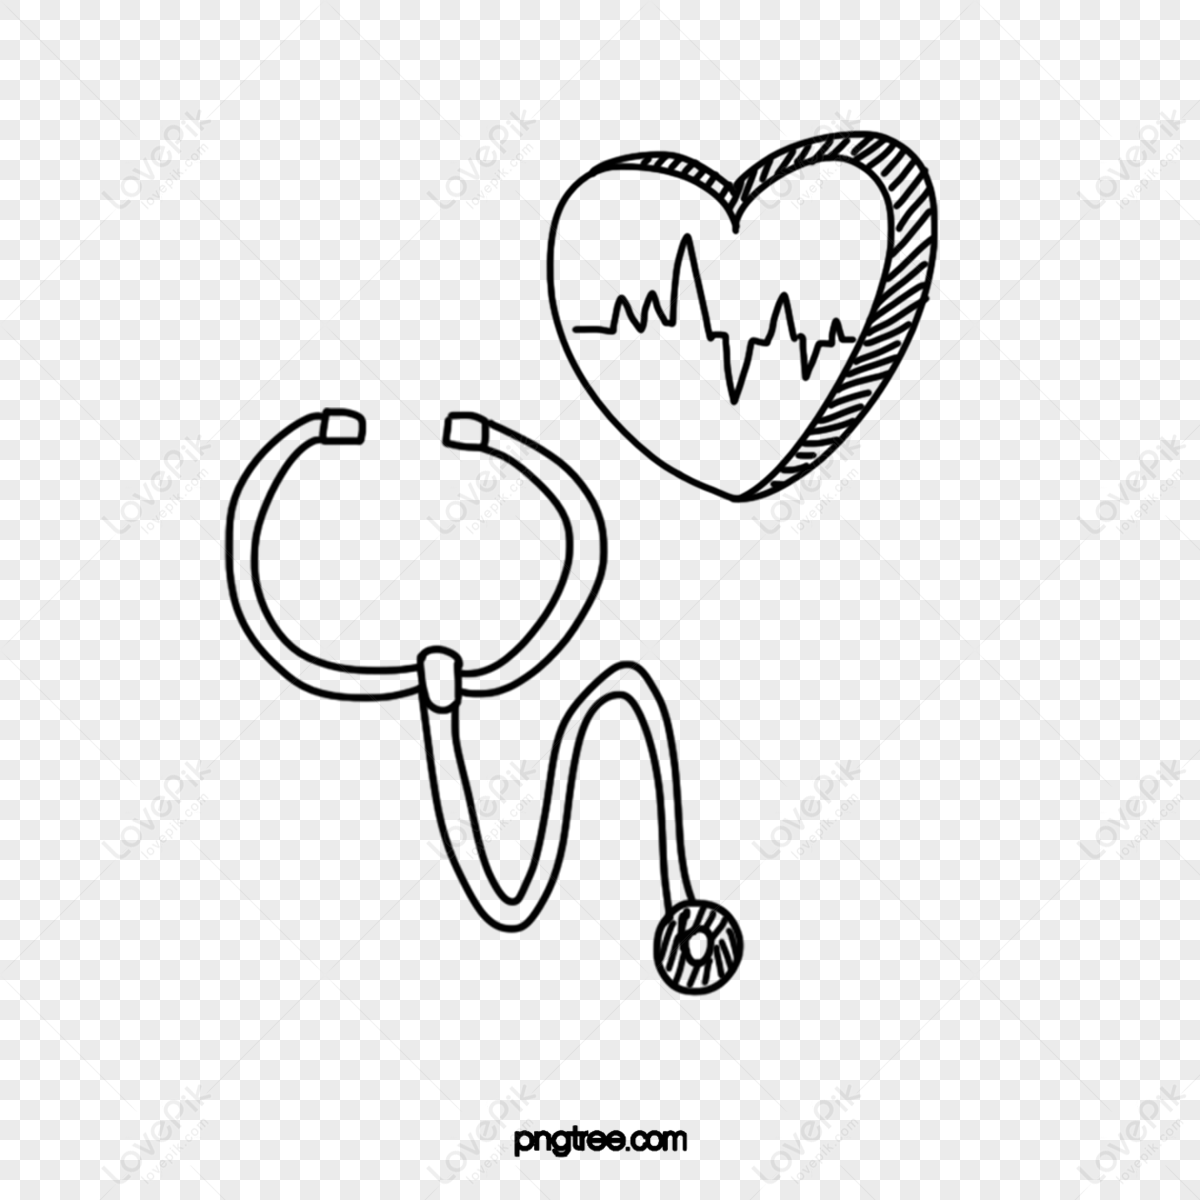 Stethoscope Drawing Line For Free Download - Stethoscope Png Black And  White, Transparent Png - kindpng